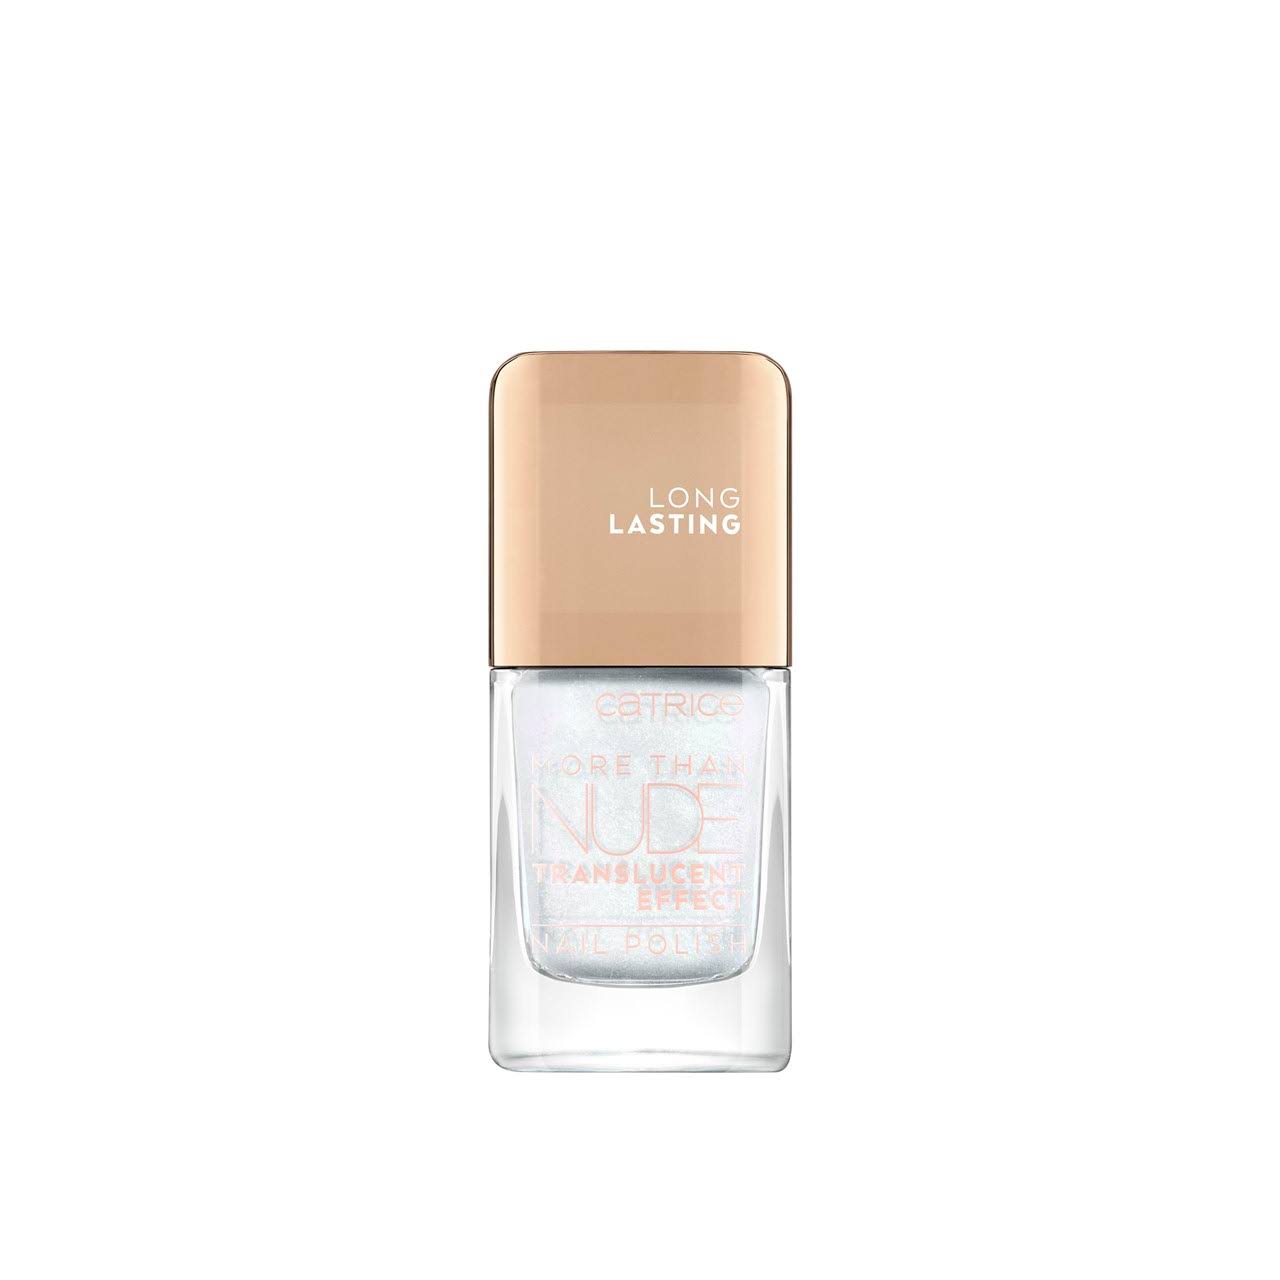 Catrice More Than Nude Translucent Effect Nail Polish 01 10.5ml